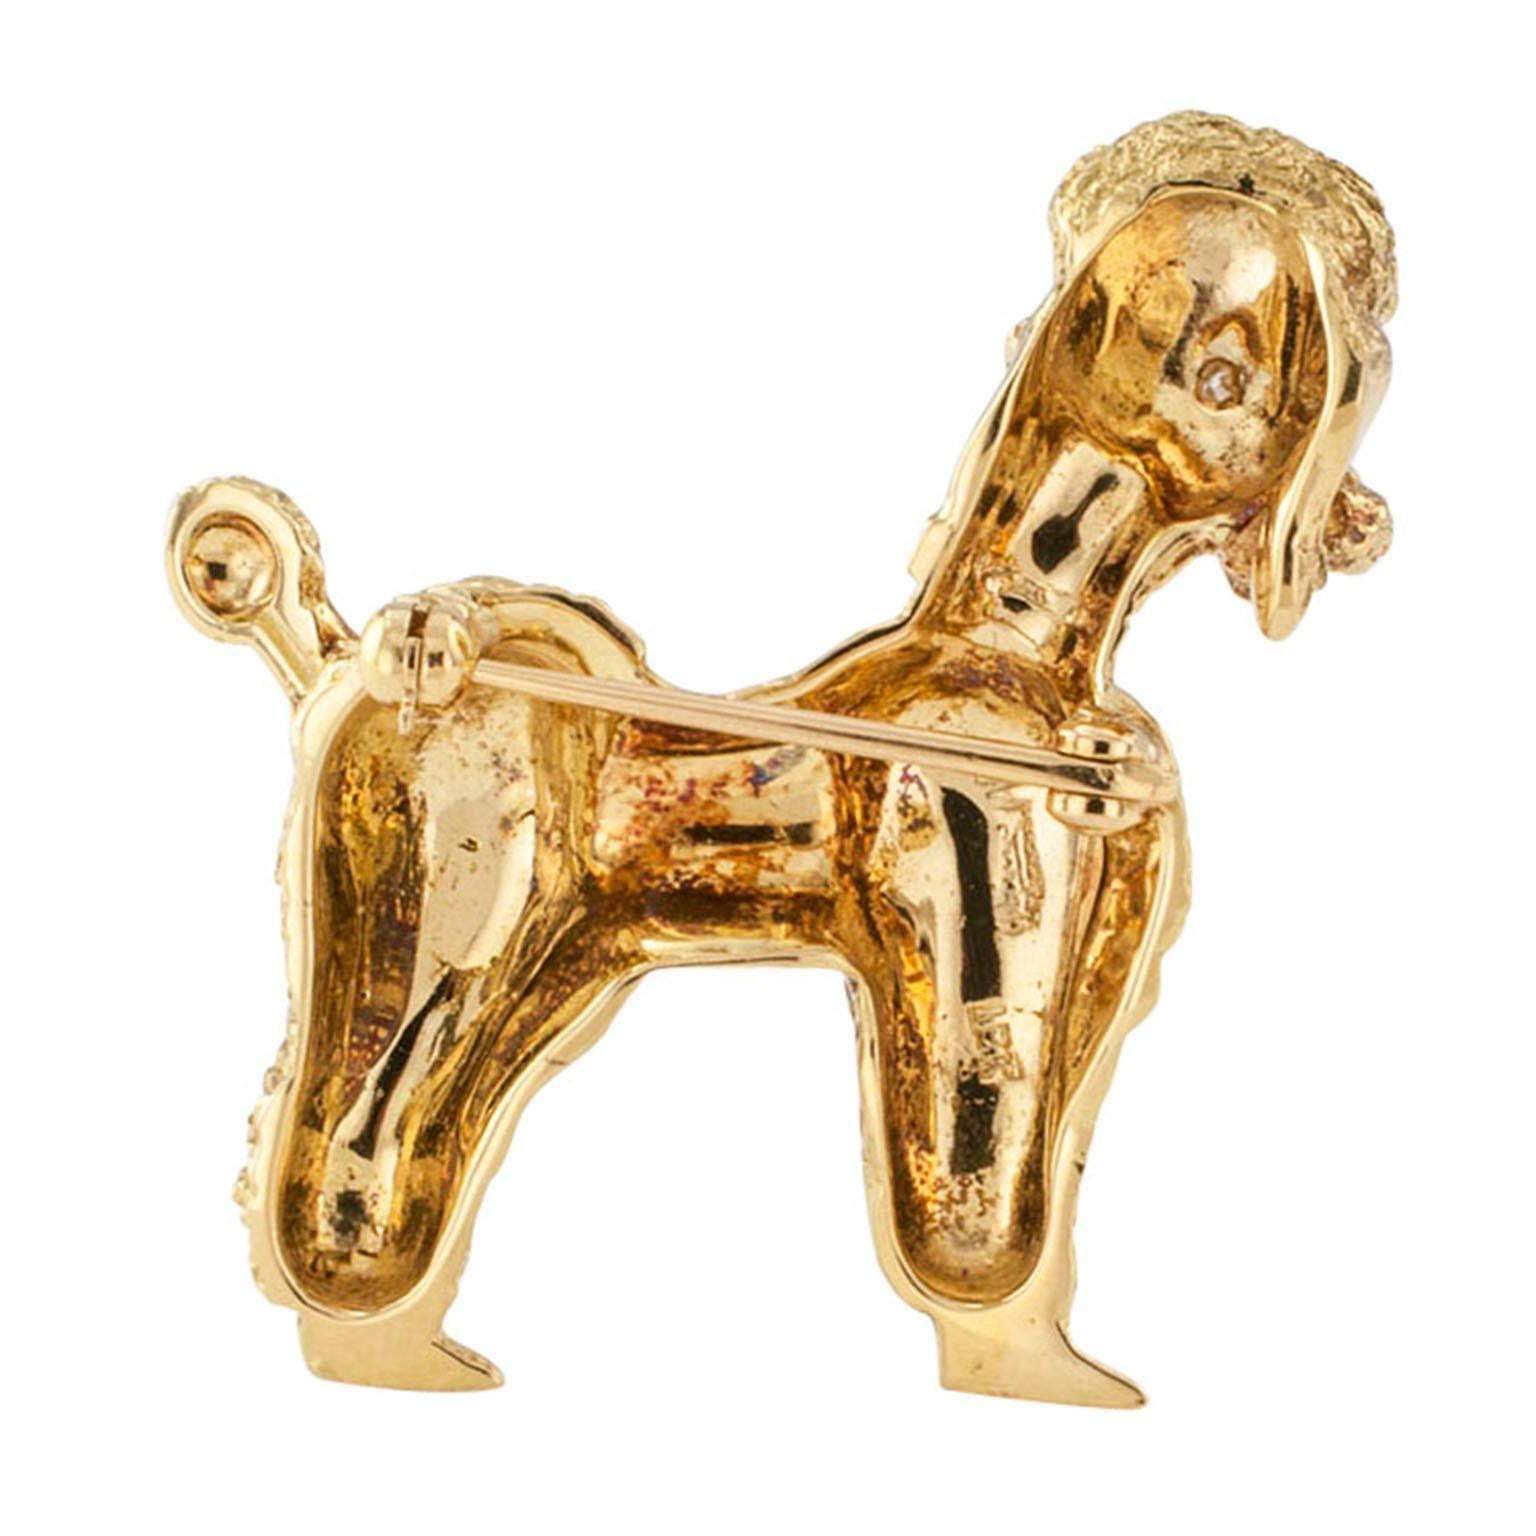 Gold and Diamond Poodle Brooch Circa 1950

Perfectly groomed and poised... with a genuine sparkle in the eyes... a real charmer. And you can take it out for a walk and the only things you'll be picking up is compliments. How wonderful is that? Mid